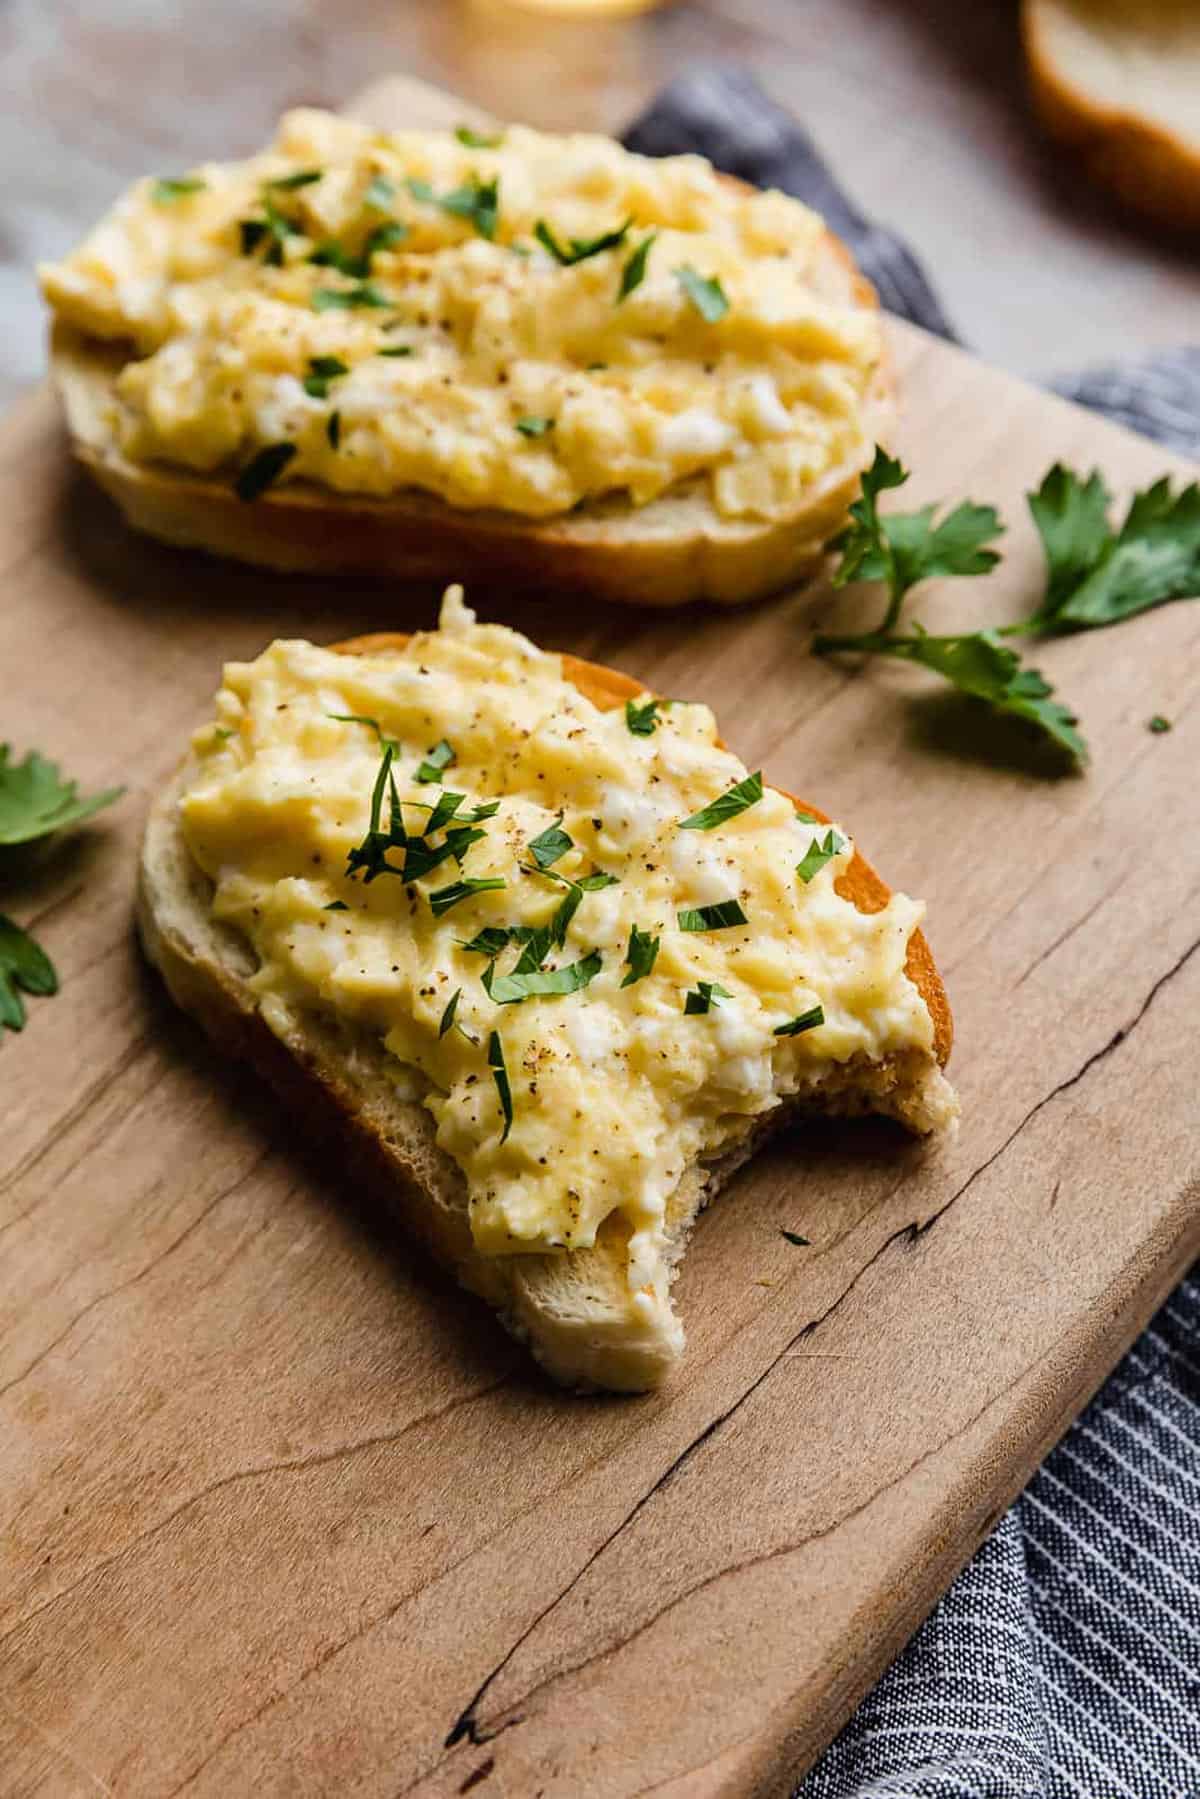  A piece of bread topped with scrambled eggs that's topped with parsley.